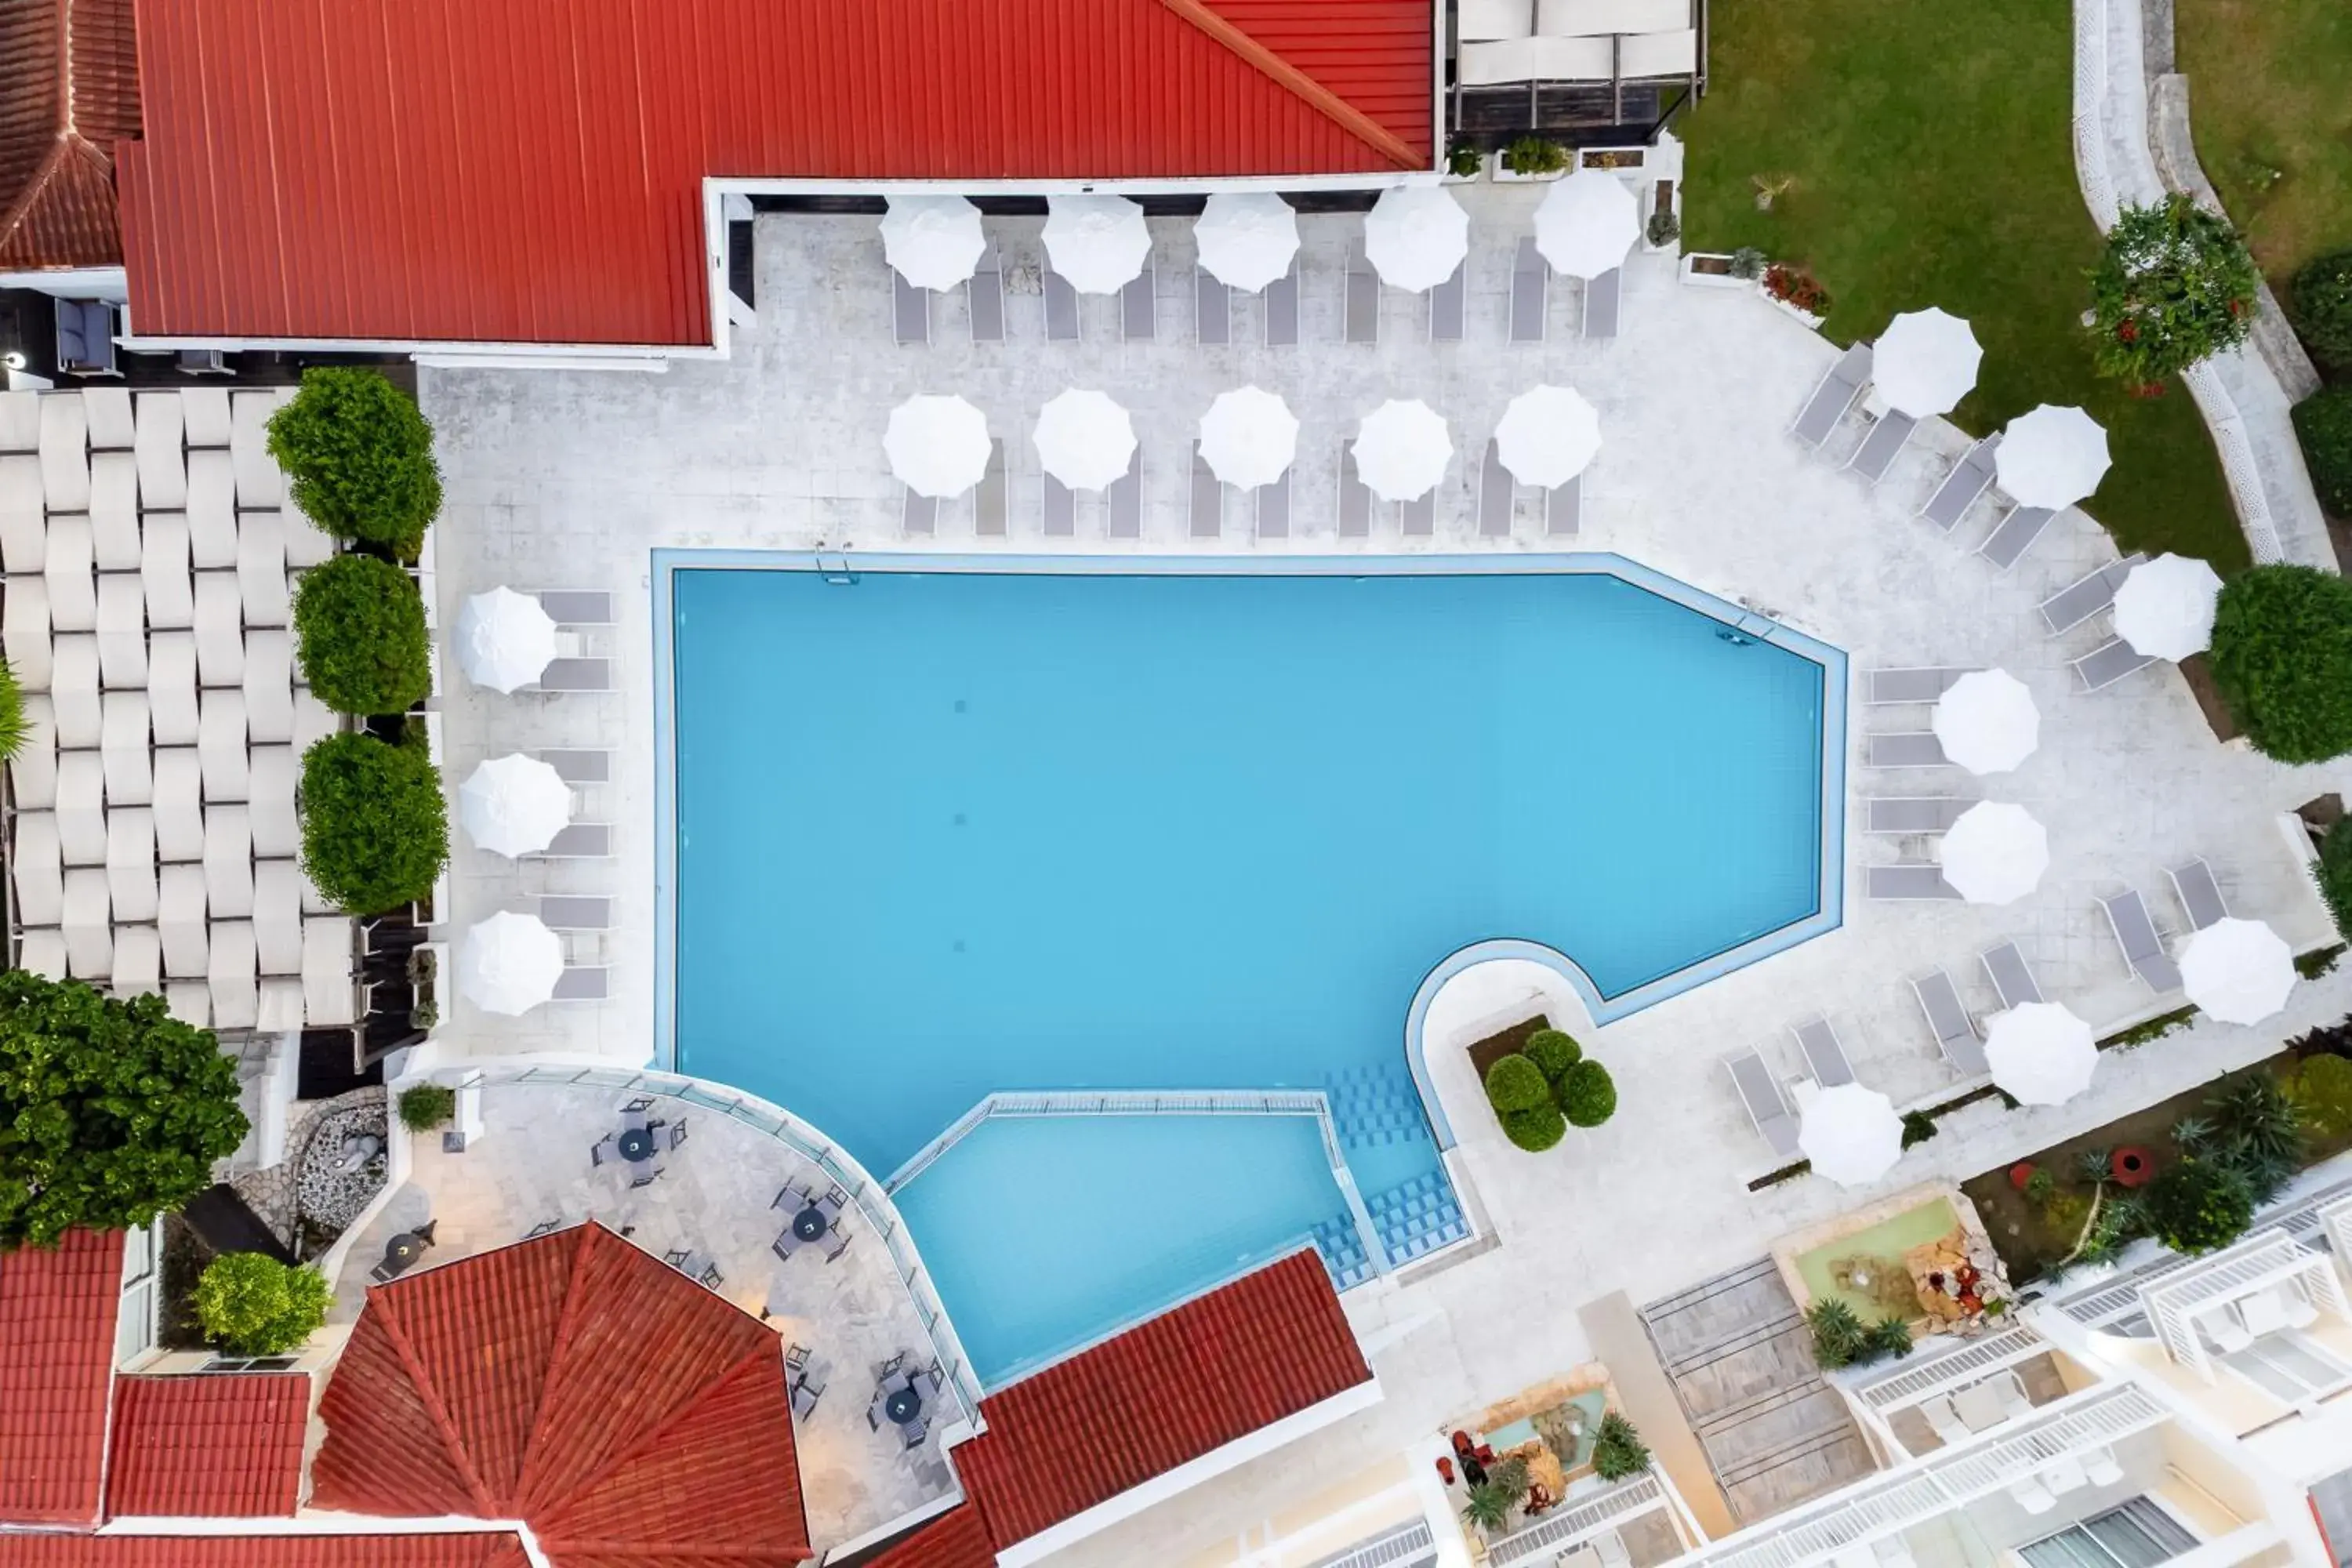 Property building, Pool View in Diana Palace Hotel